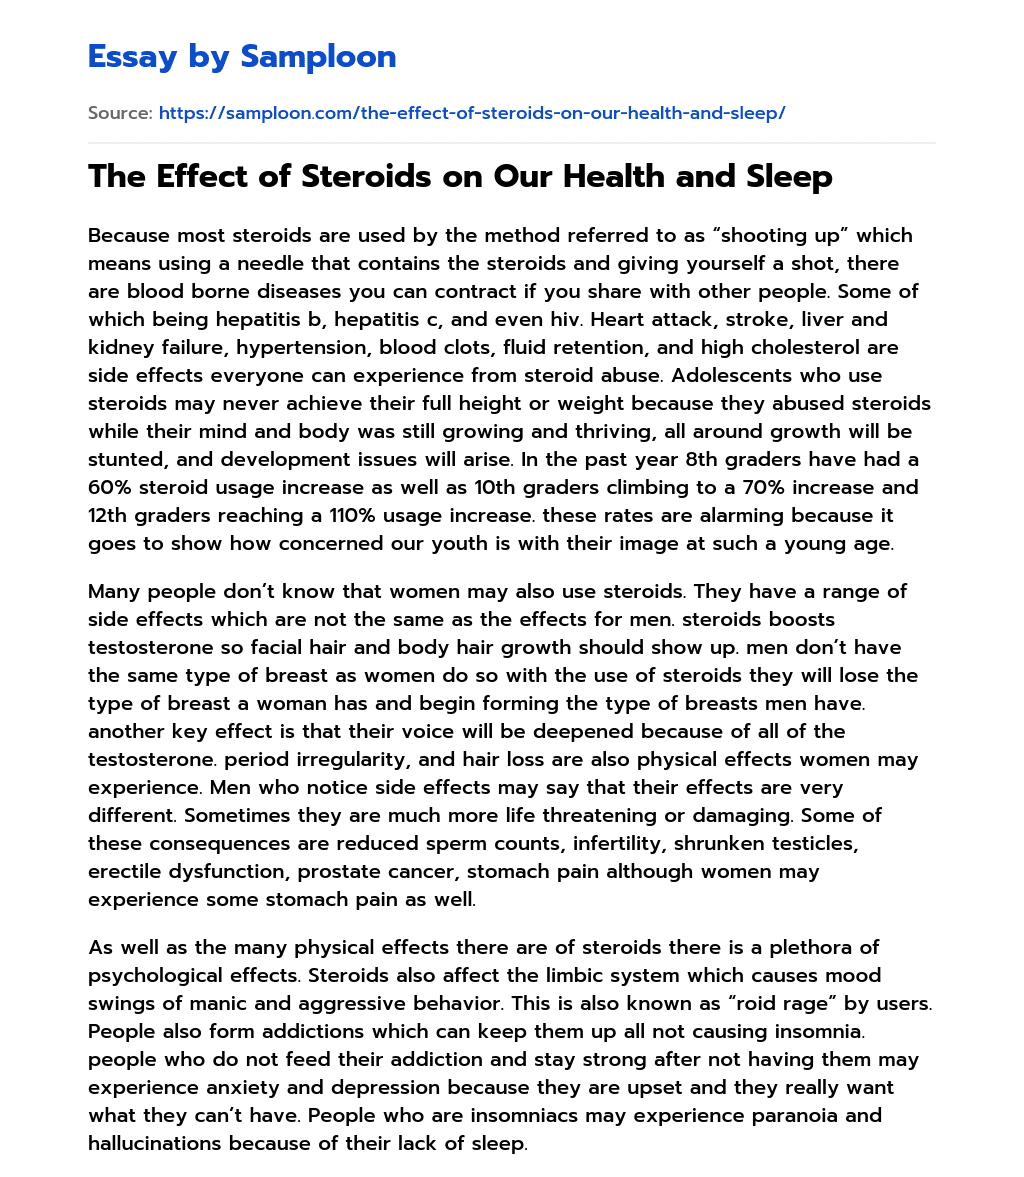 The Effect of Steroids on Our Health and Sleep essay